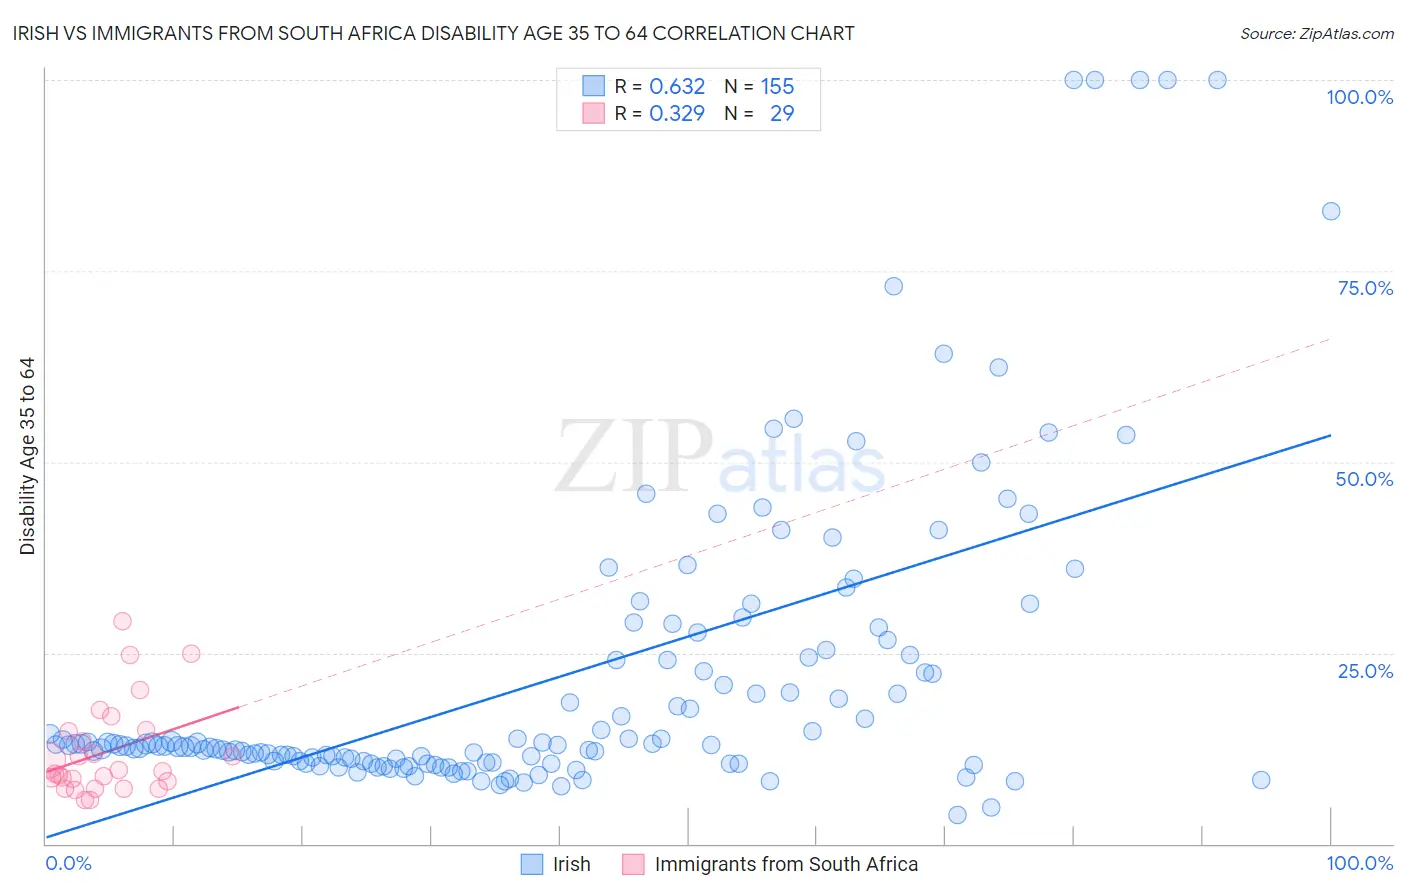 Irish vs Immigrants from South Africa Disability Age 35 to 64